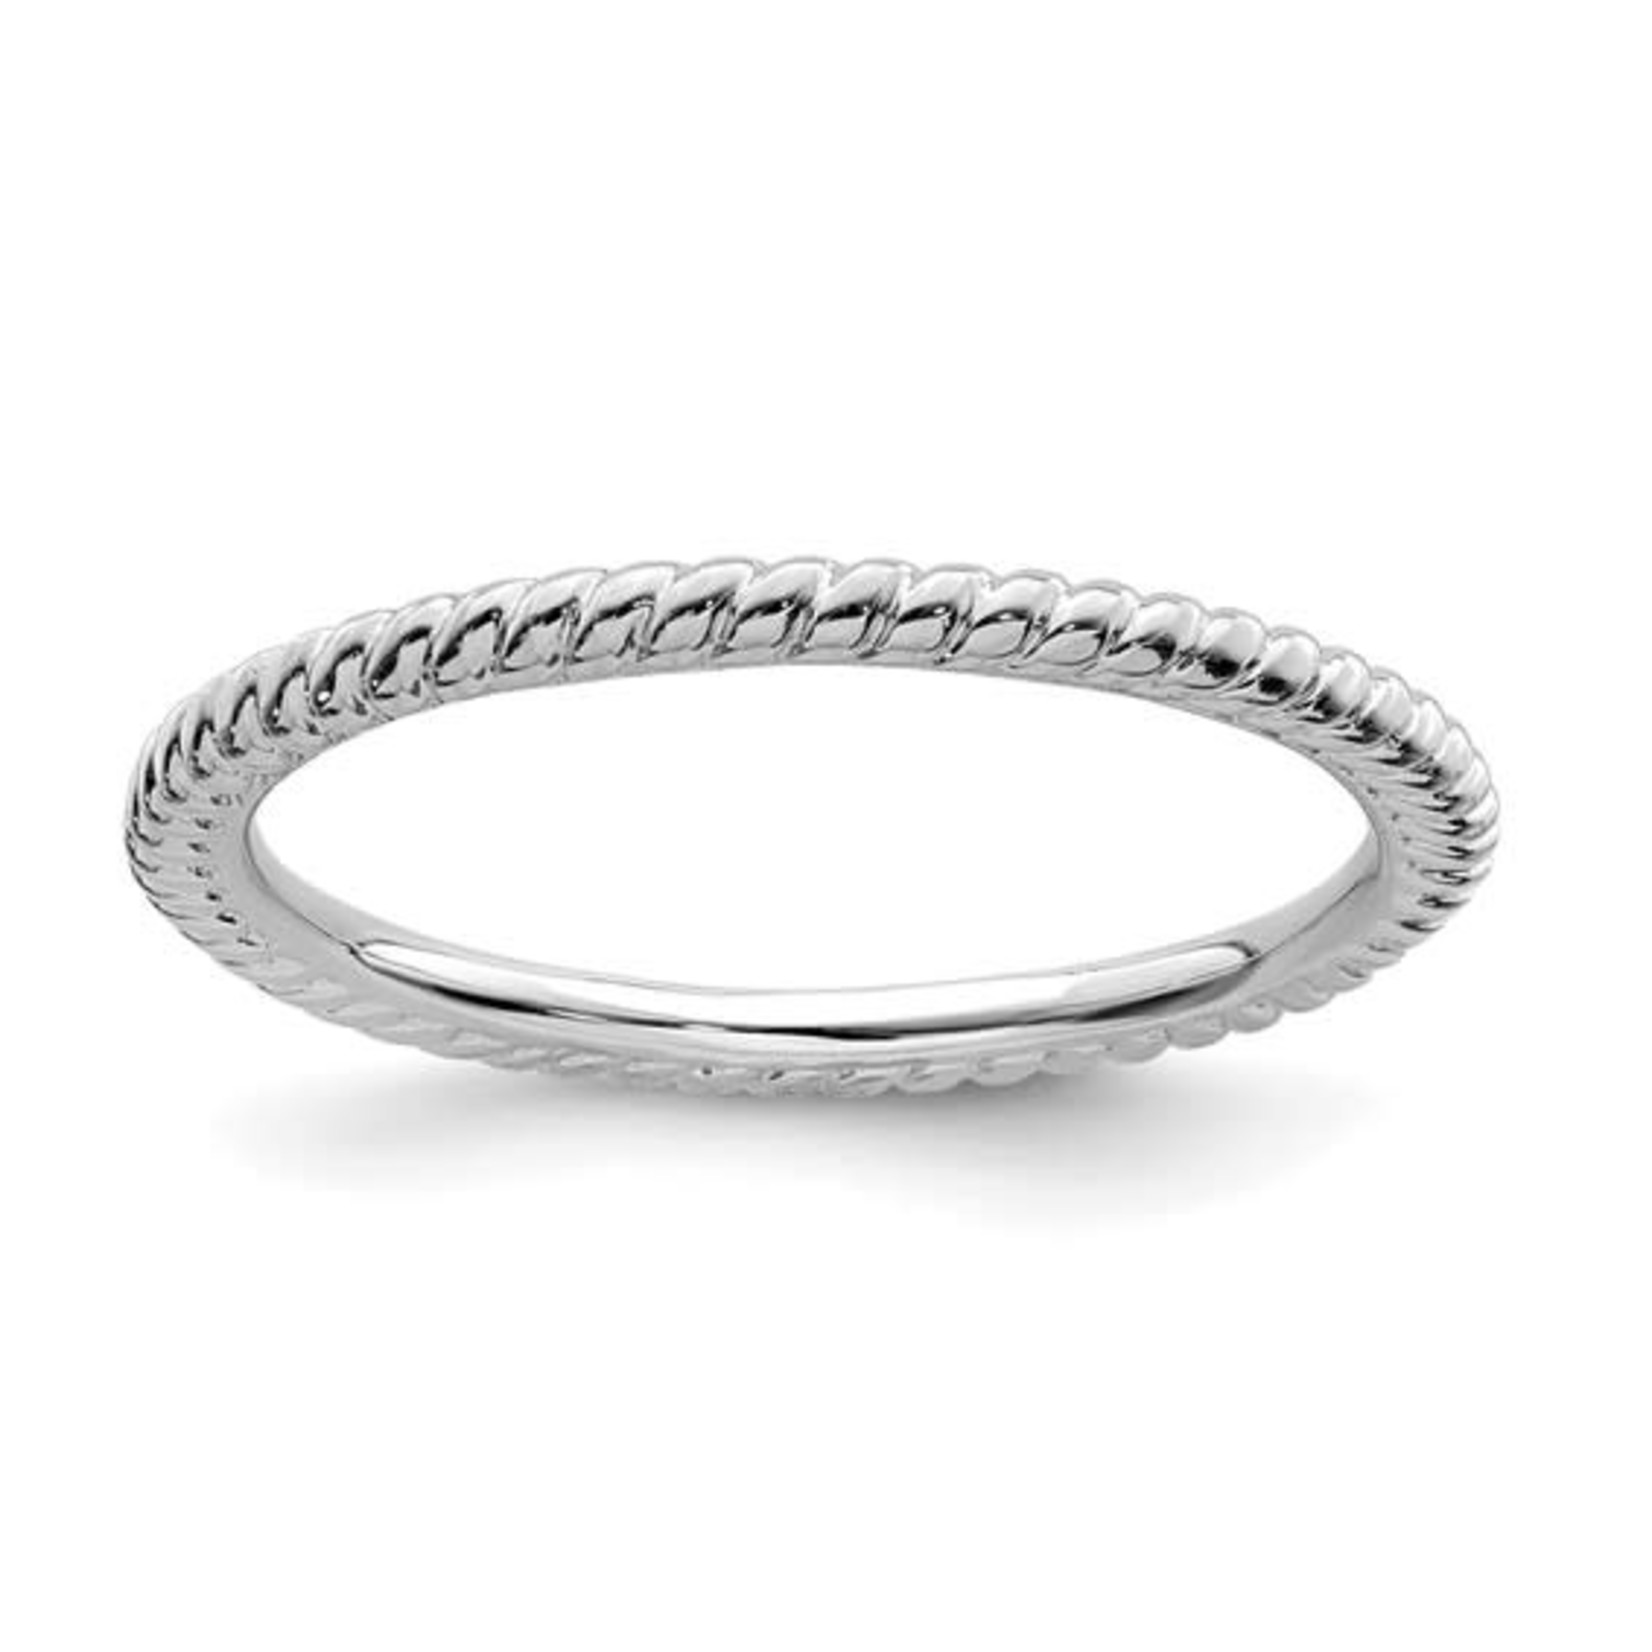 This Is Life Classic Narrow Twist Sterling Silver Stackable Ring